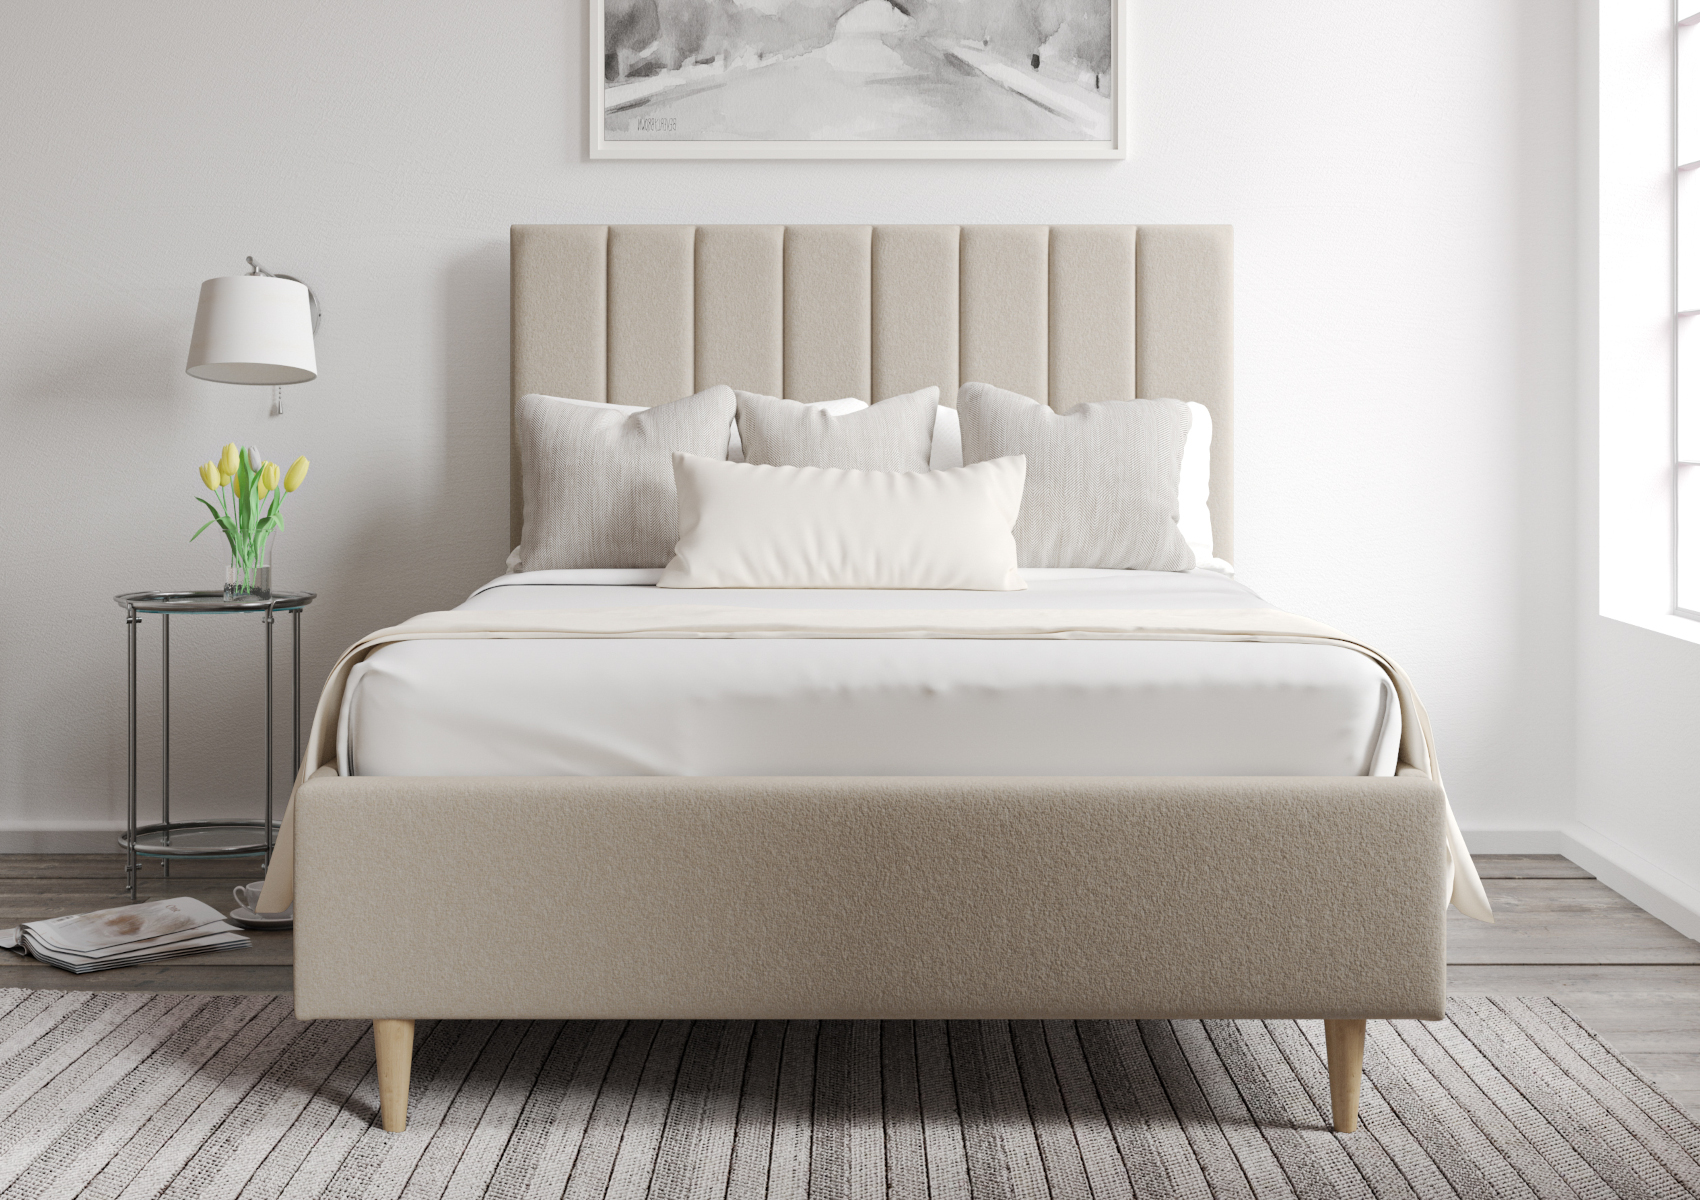 View Eden Arran Natural Upholstered Double Bed Time4Sleep information